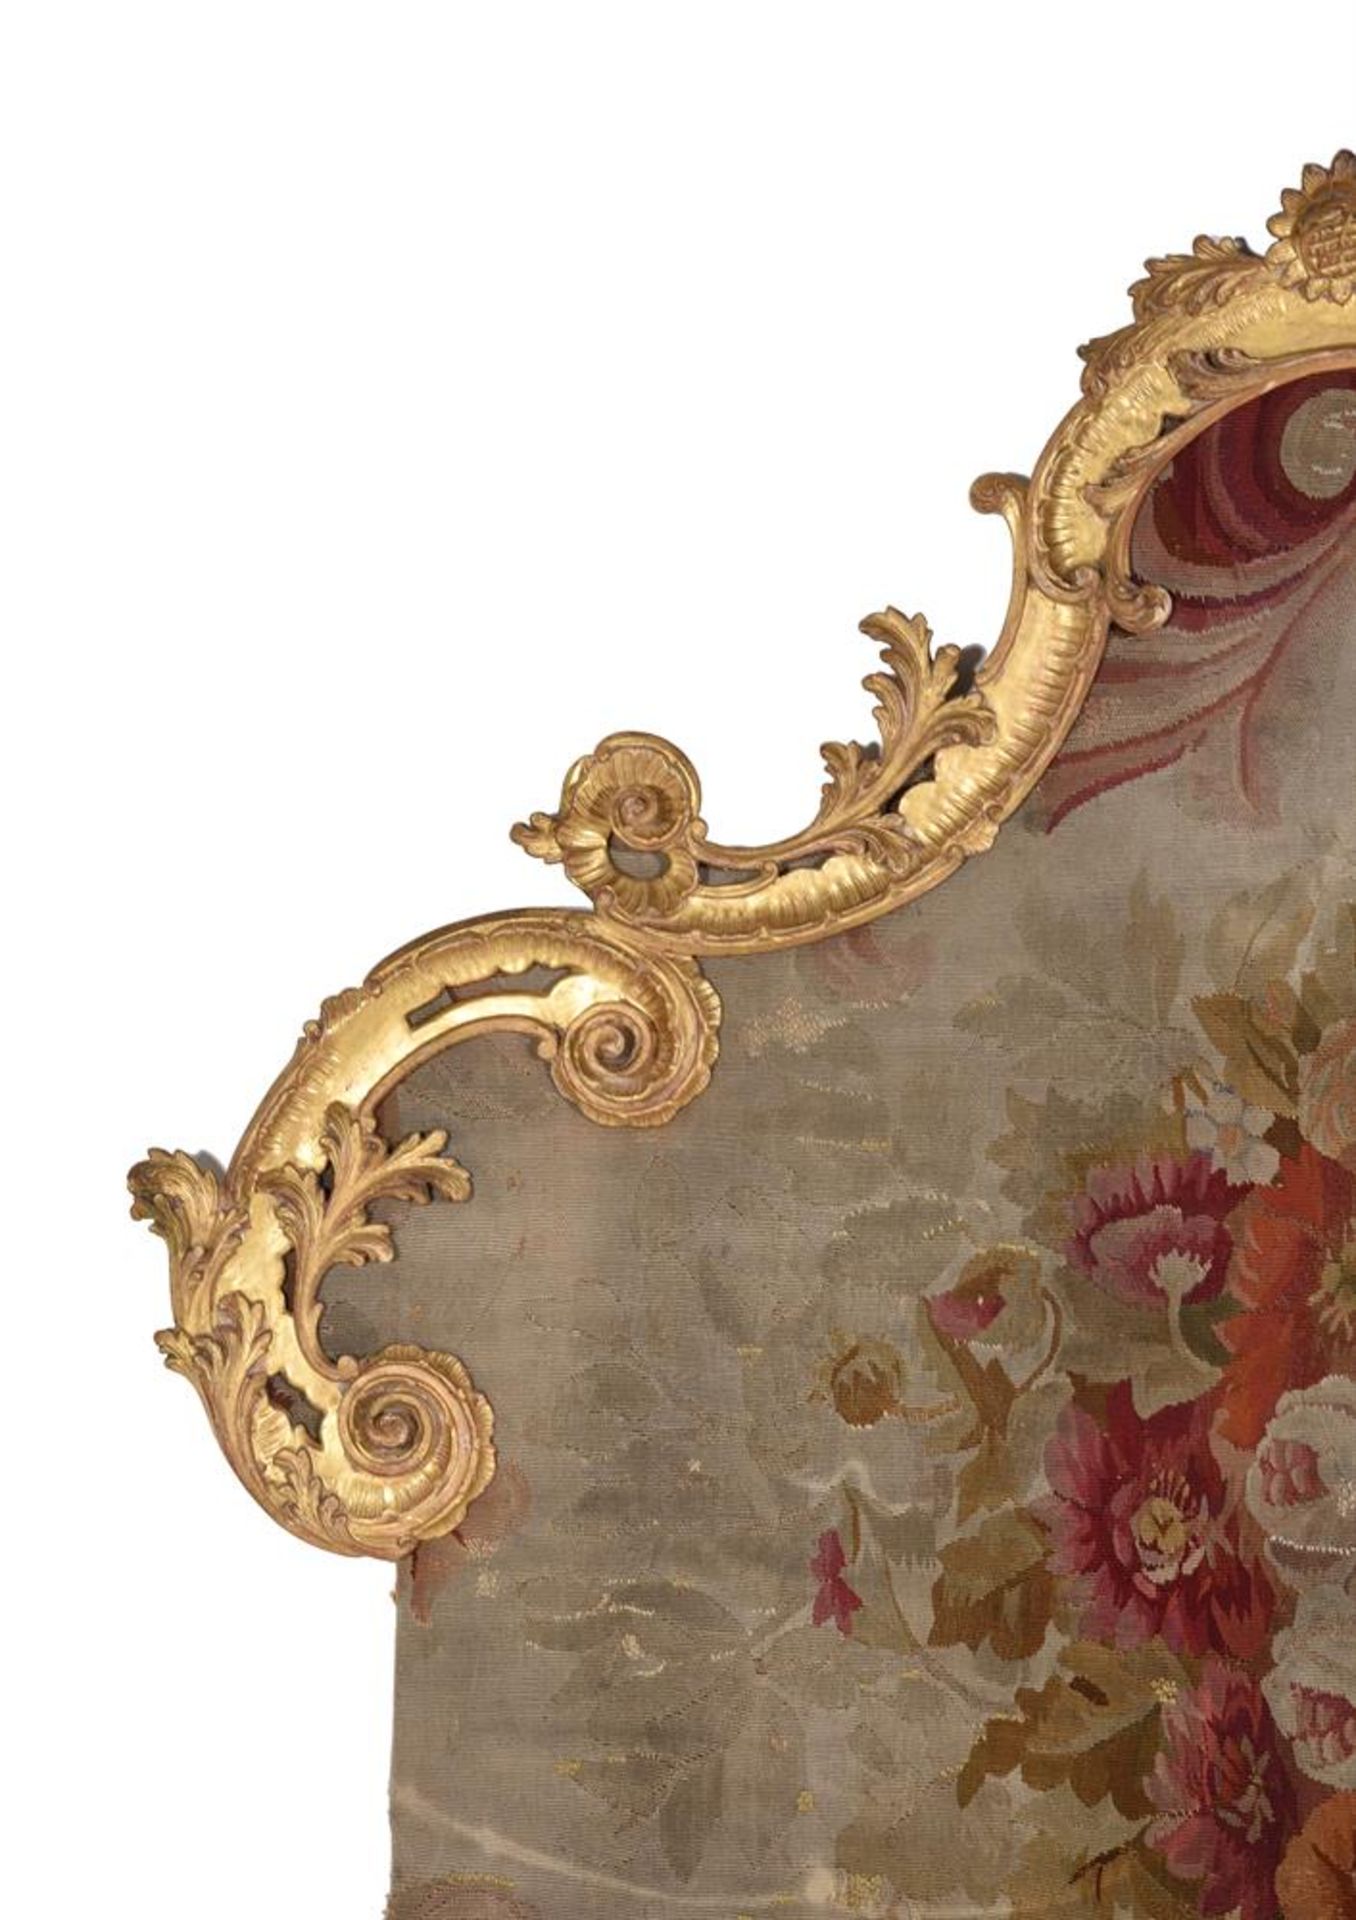 A CONTINENTAL CARVED GILTWOOD AND AUBUSSON NEEDLEWORK INSET BED HEAD, LATE 18TH/19TH CENTURY - Image 4 of 4